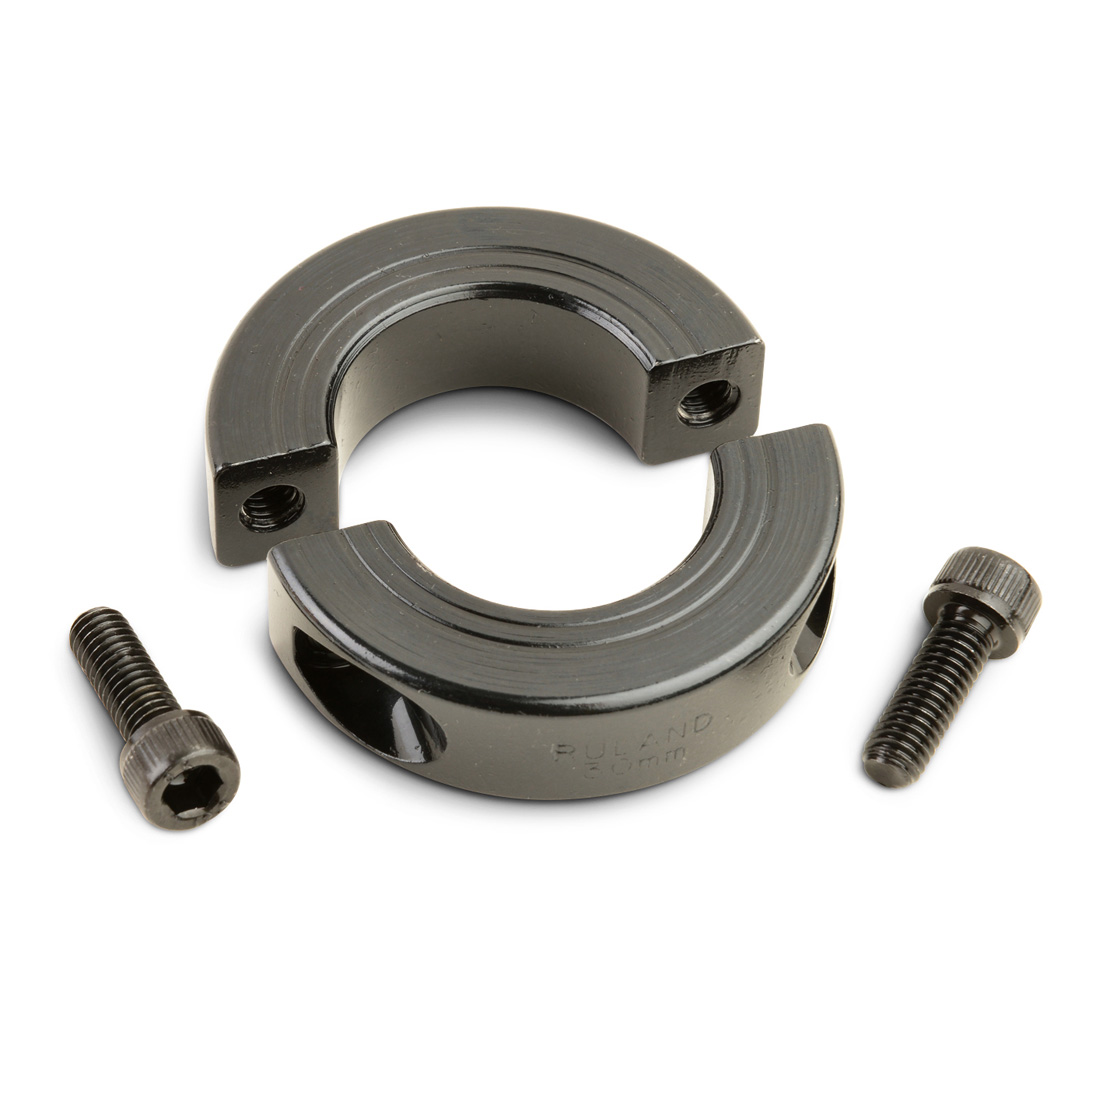 11//16 Width 2 5//8 OD Aluminum Ruland SP-26-A Two-Piece Clamping Shaft Collar 1.625 Bore